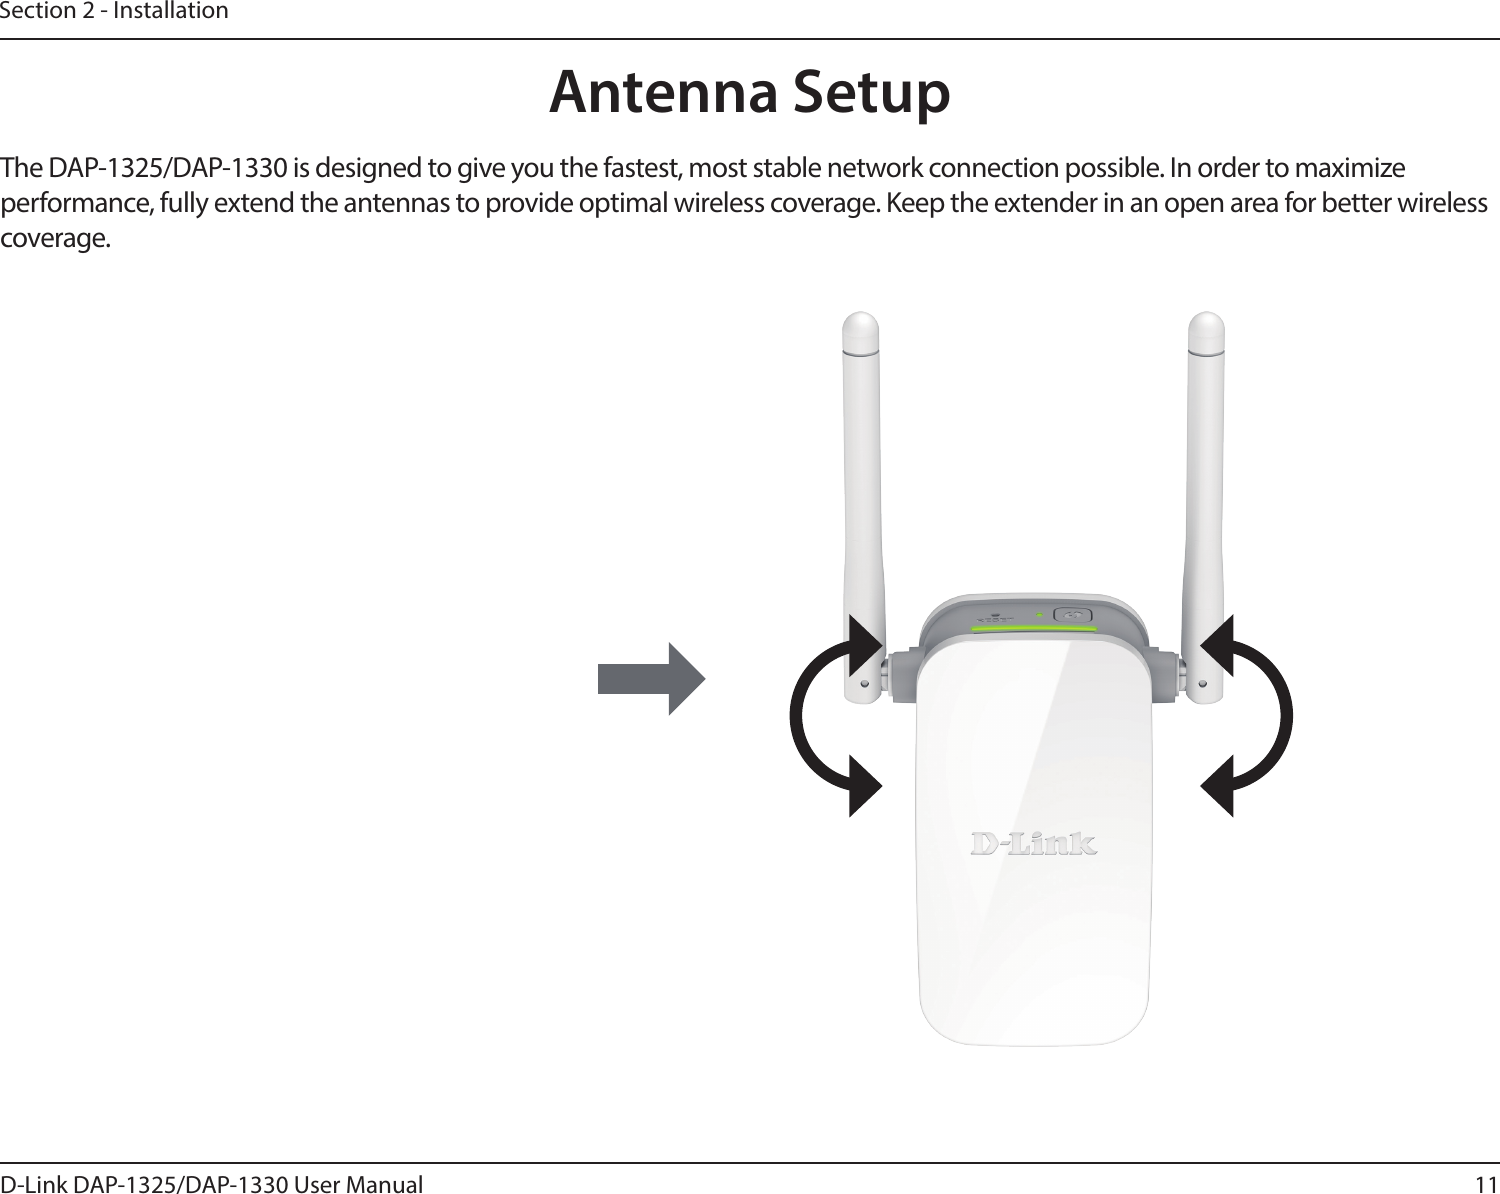 11D-Link DAP-1325/DAP-1330 User ManualSection 2 - InstallationAntenna SetupThe DAP-1325/DAP-1330 is designed to give you the fastest, most stable network connection possible. In order to maximize performance, fully extend the antennas to provide optimal wireless coverage. Keep the extender in an open area for better wireless coverage. 